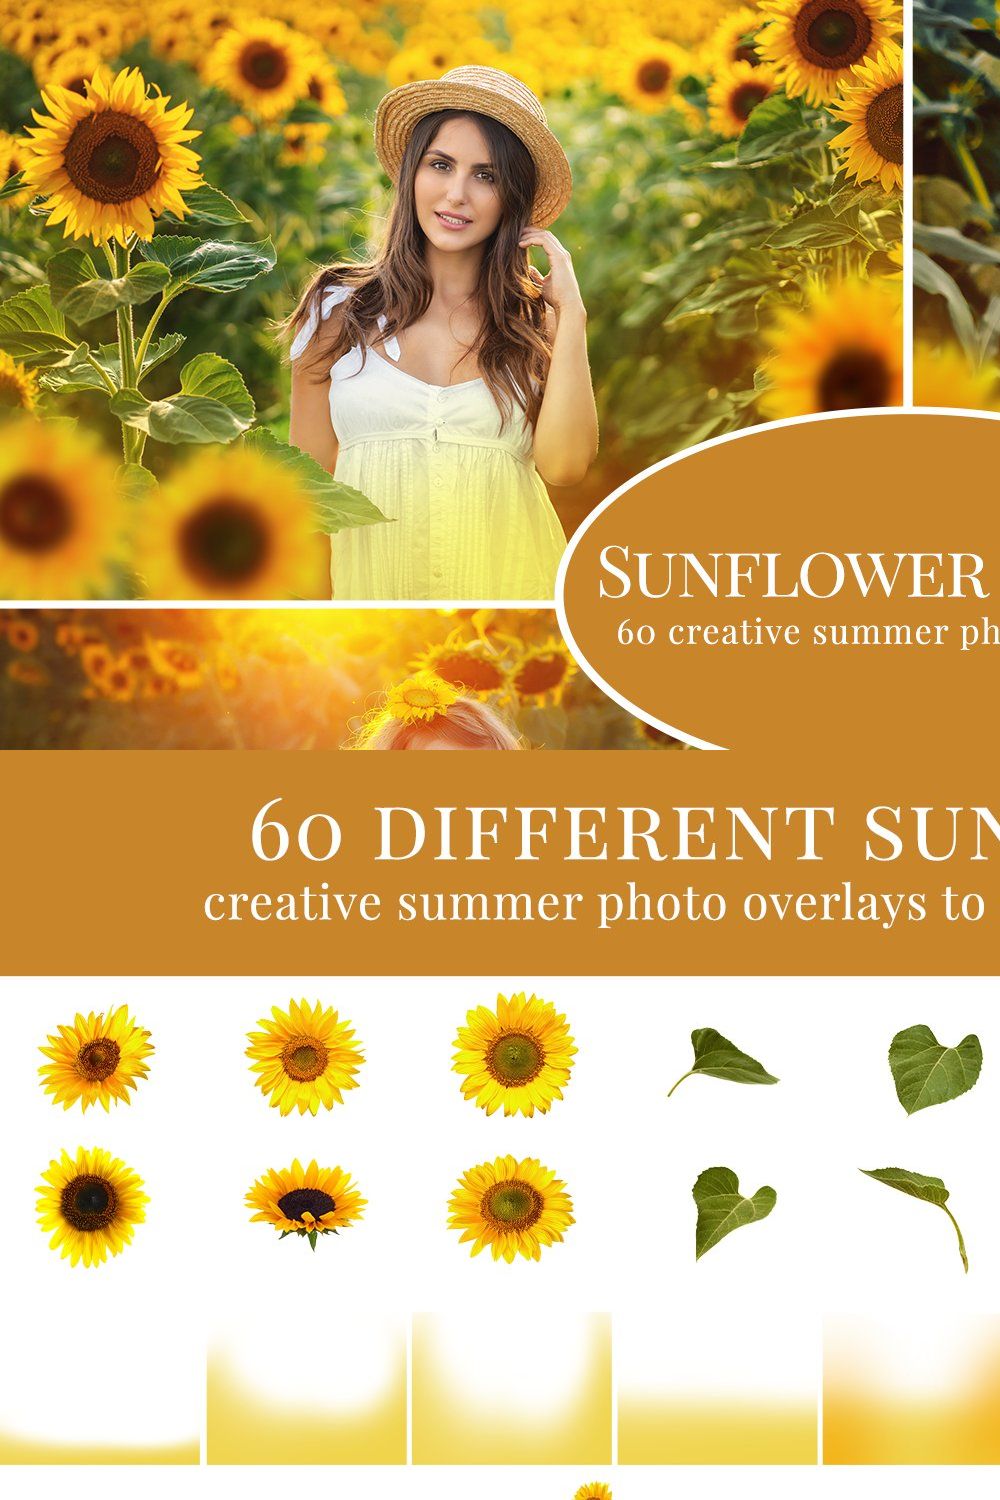 Sunflower Fields photo overlays pinterest preview image.